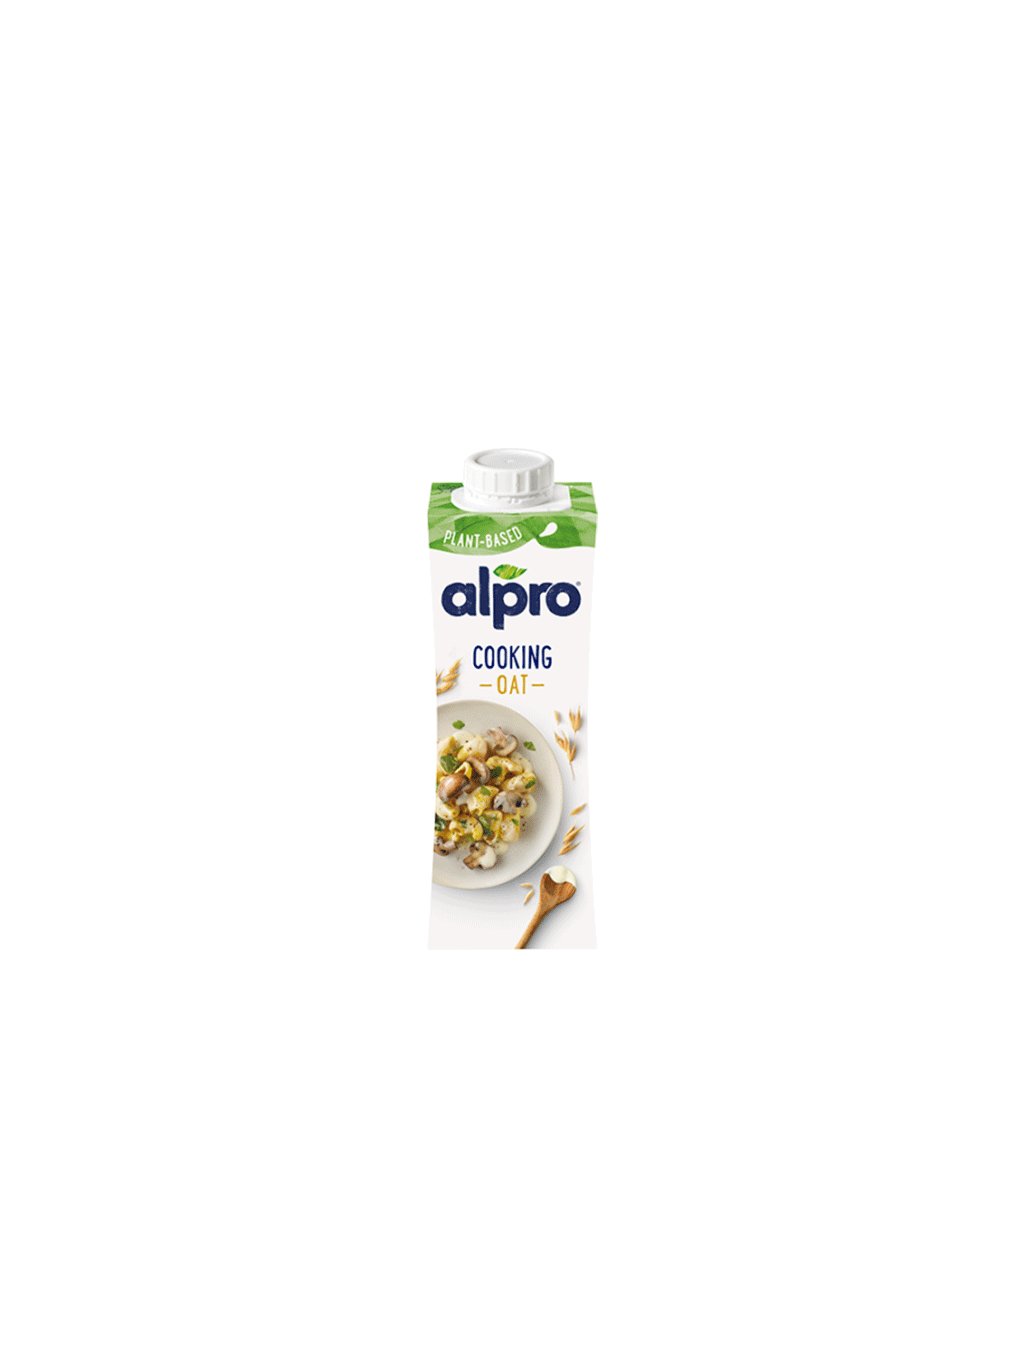 ALPRO oat cooking green heads